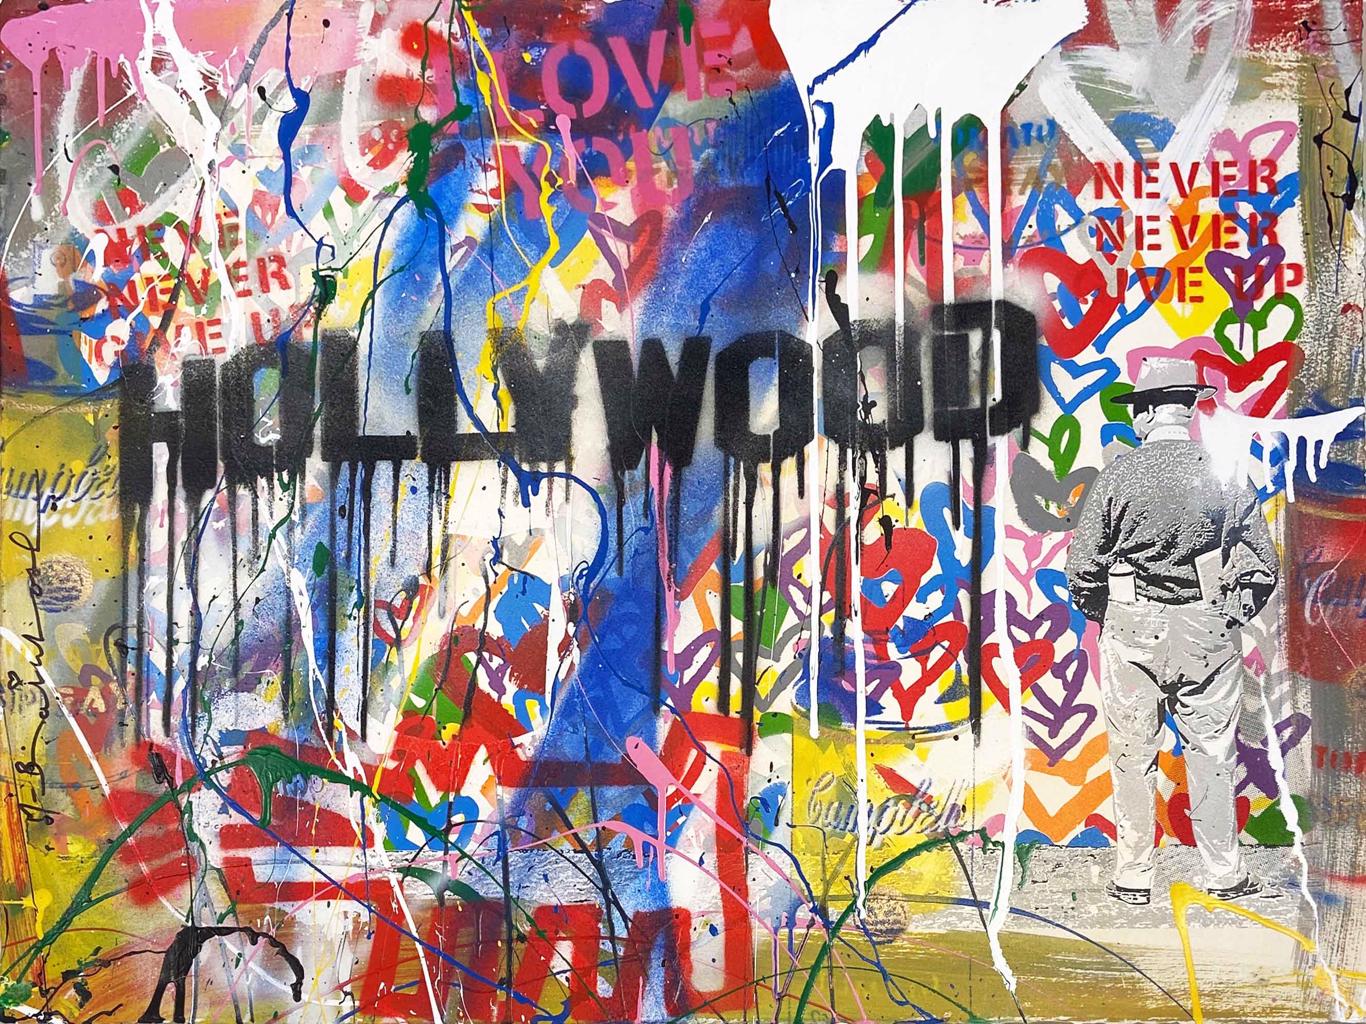 Mr. Brainwash, 'Hollywood (P103364)', 2016 | Available for Sale